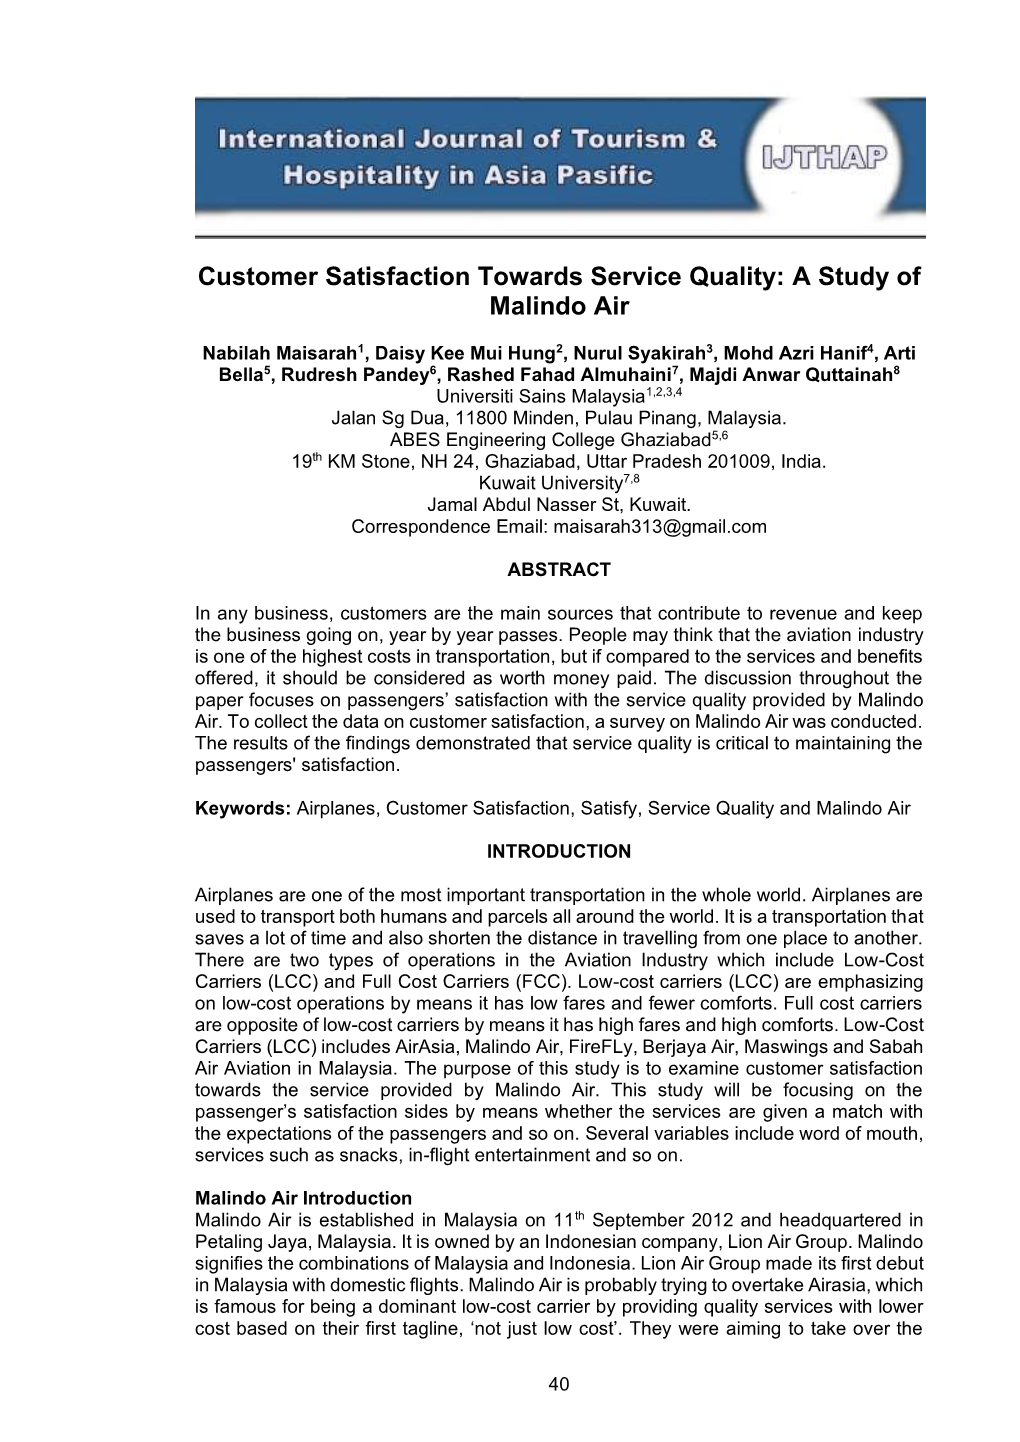 Customer Satisfaction Towards Service Quality: a Study of Malindo Air